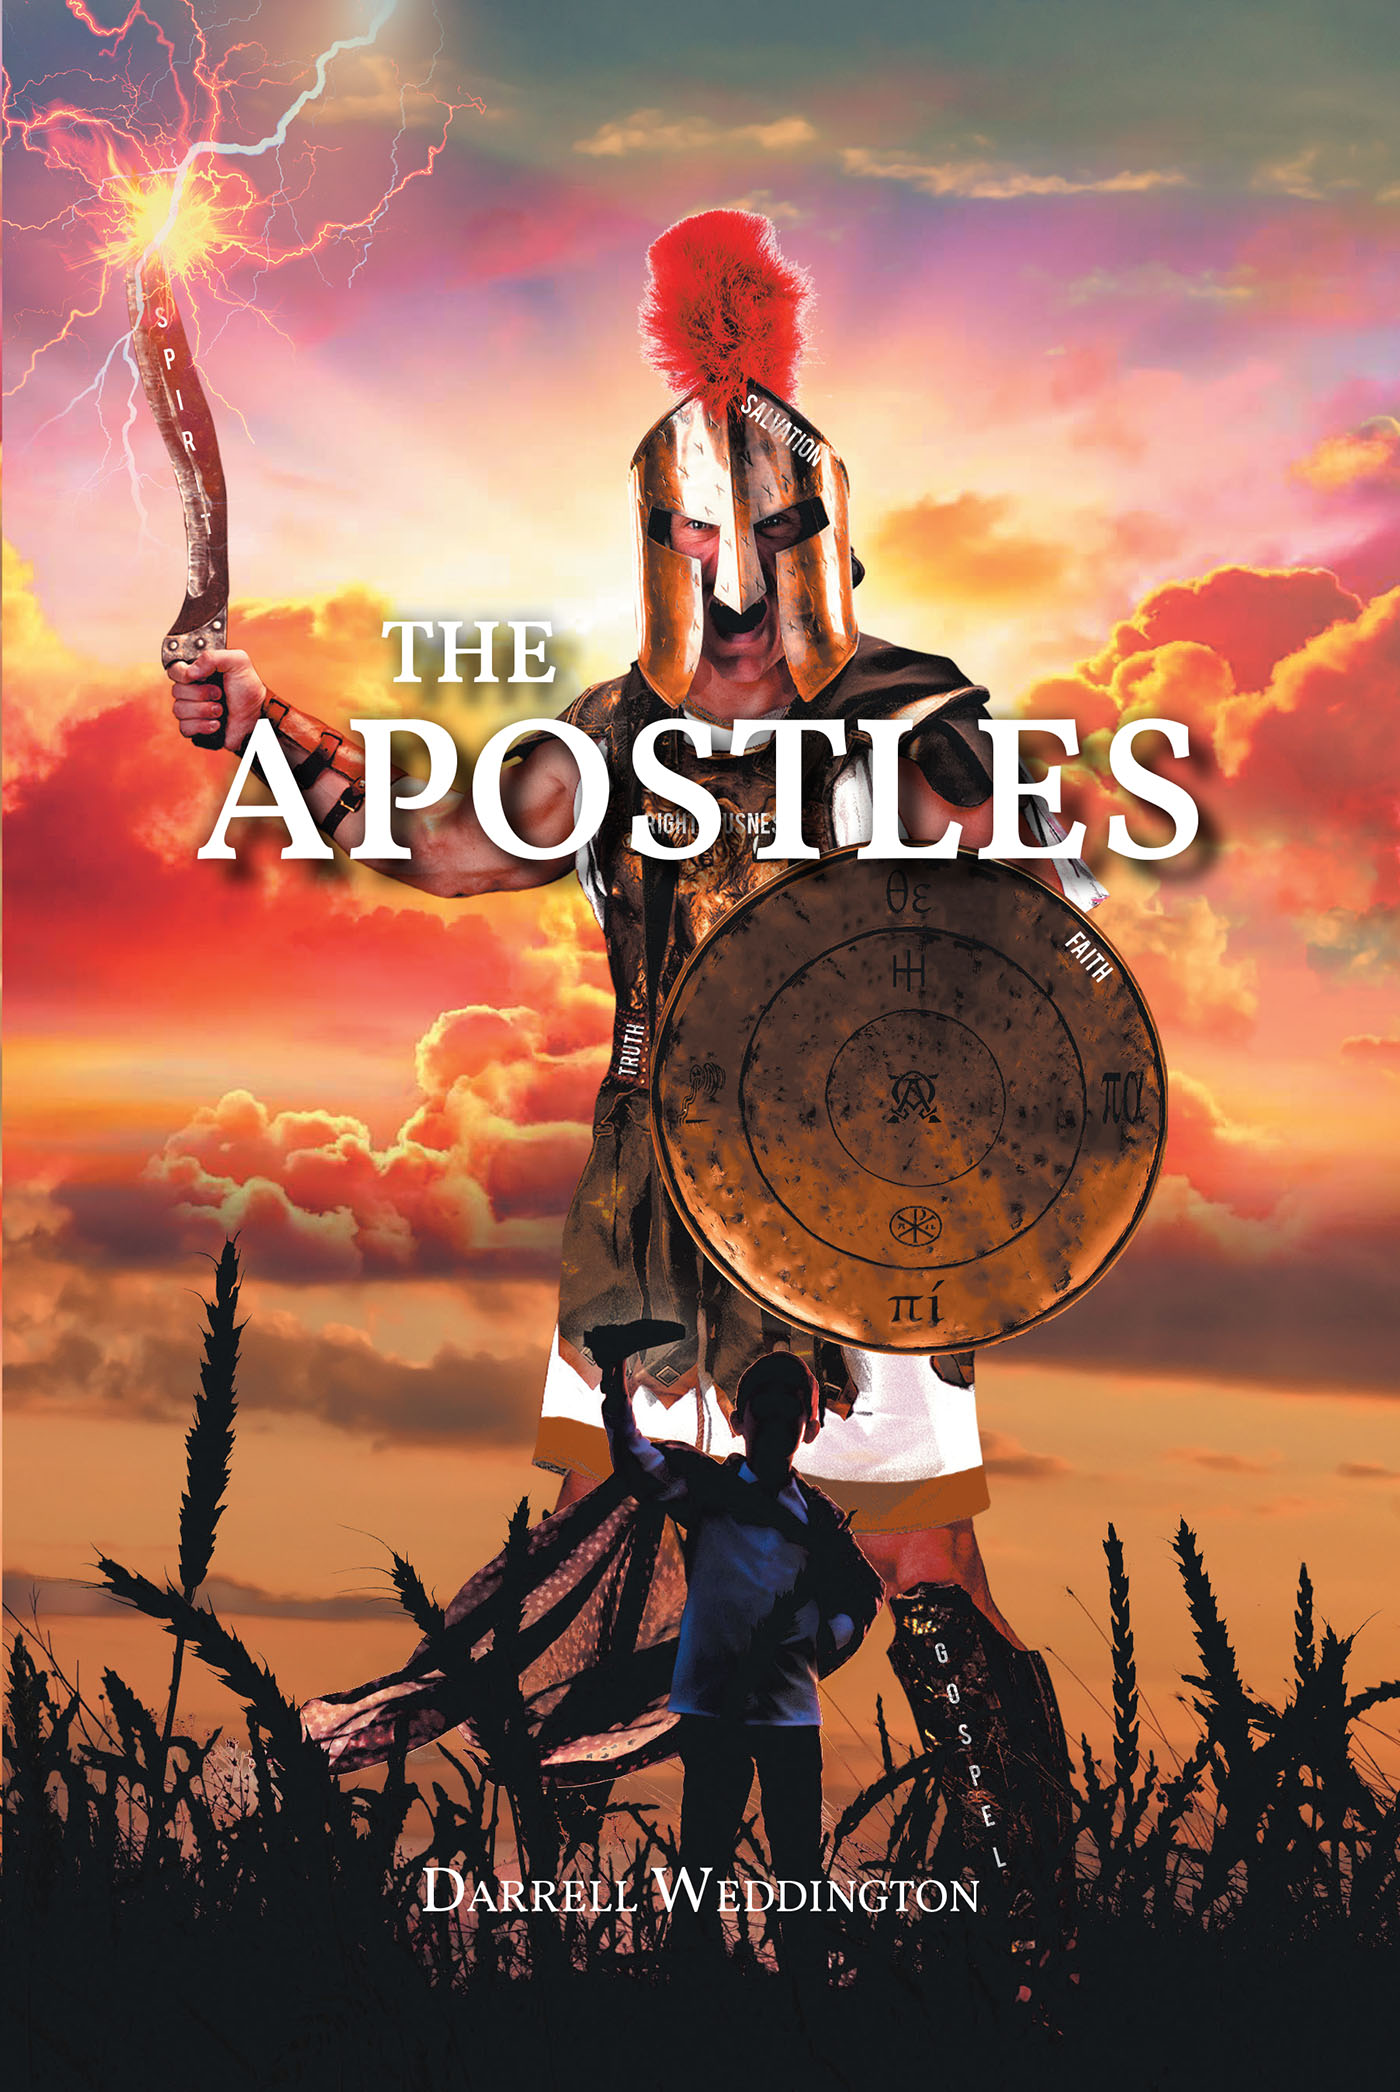 Darrell Weddington’s Newly Released "The Apostles" is a Compelling Young Adult Fiction That Packs a Spiritual Punch